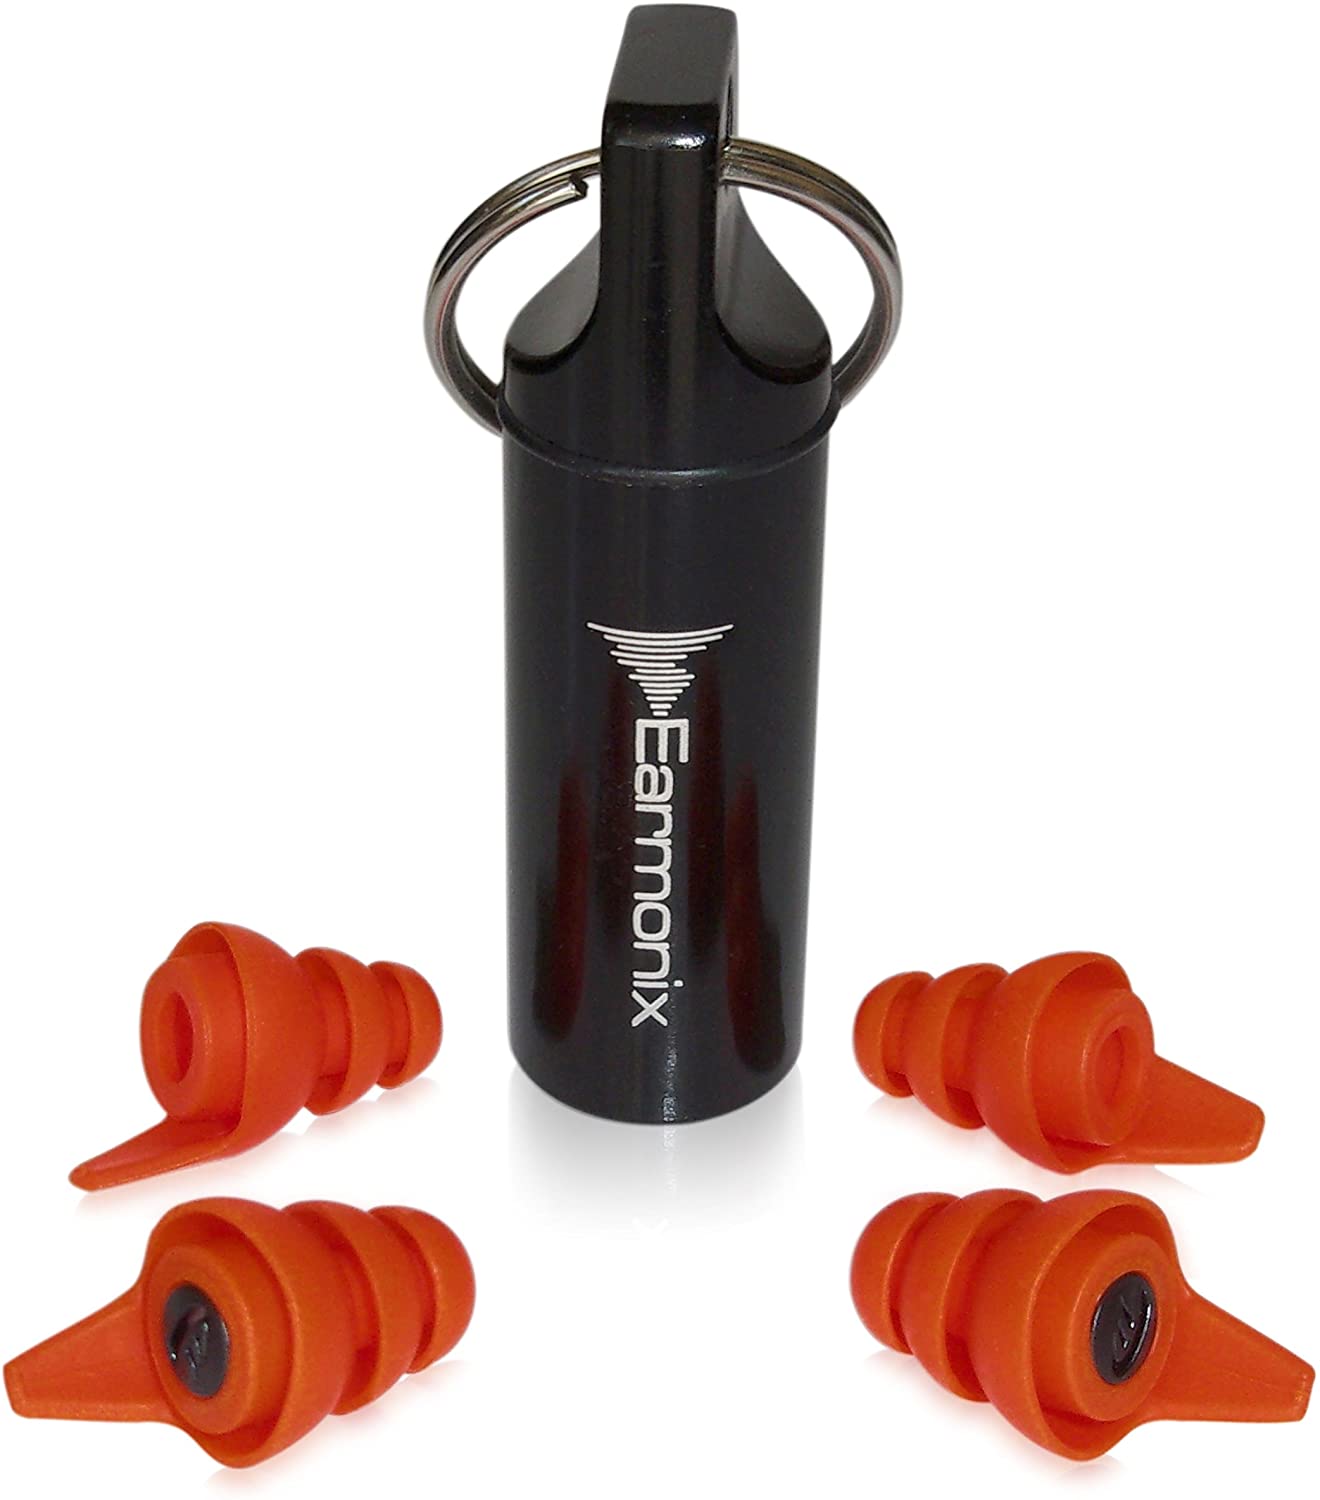 Earmonix Industrial and Home Improvement Ear Plugs - Reusable Ear Protection for Construction, Remodeling and General Noise Reduction - Soft Medical-Grade TPE for Comfort and Safety